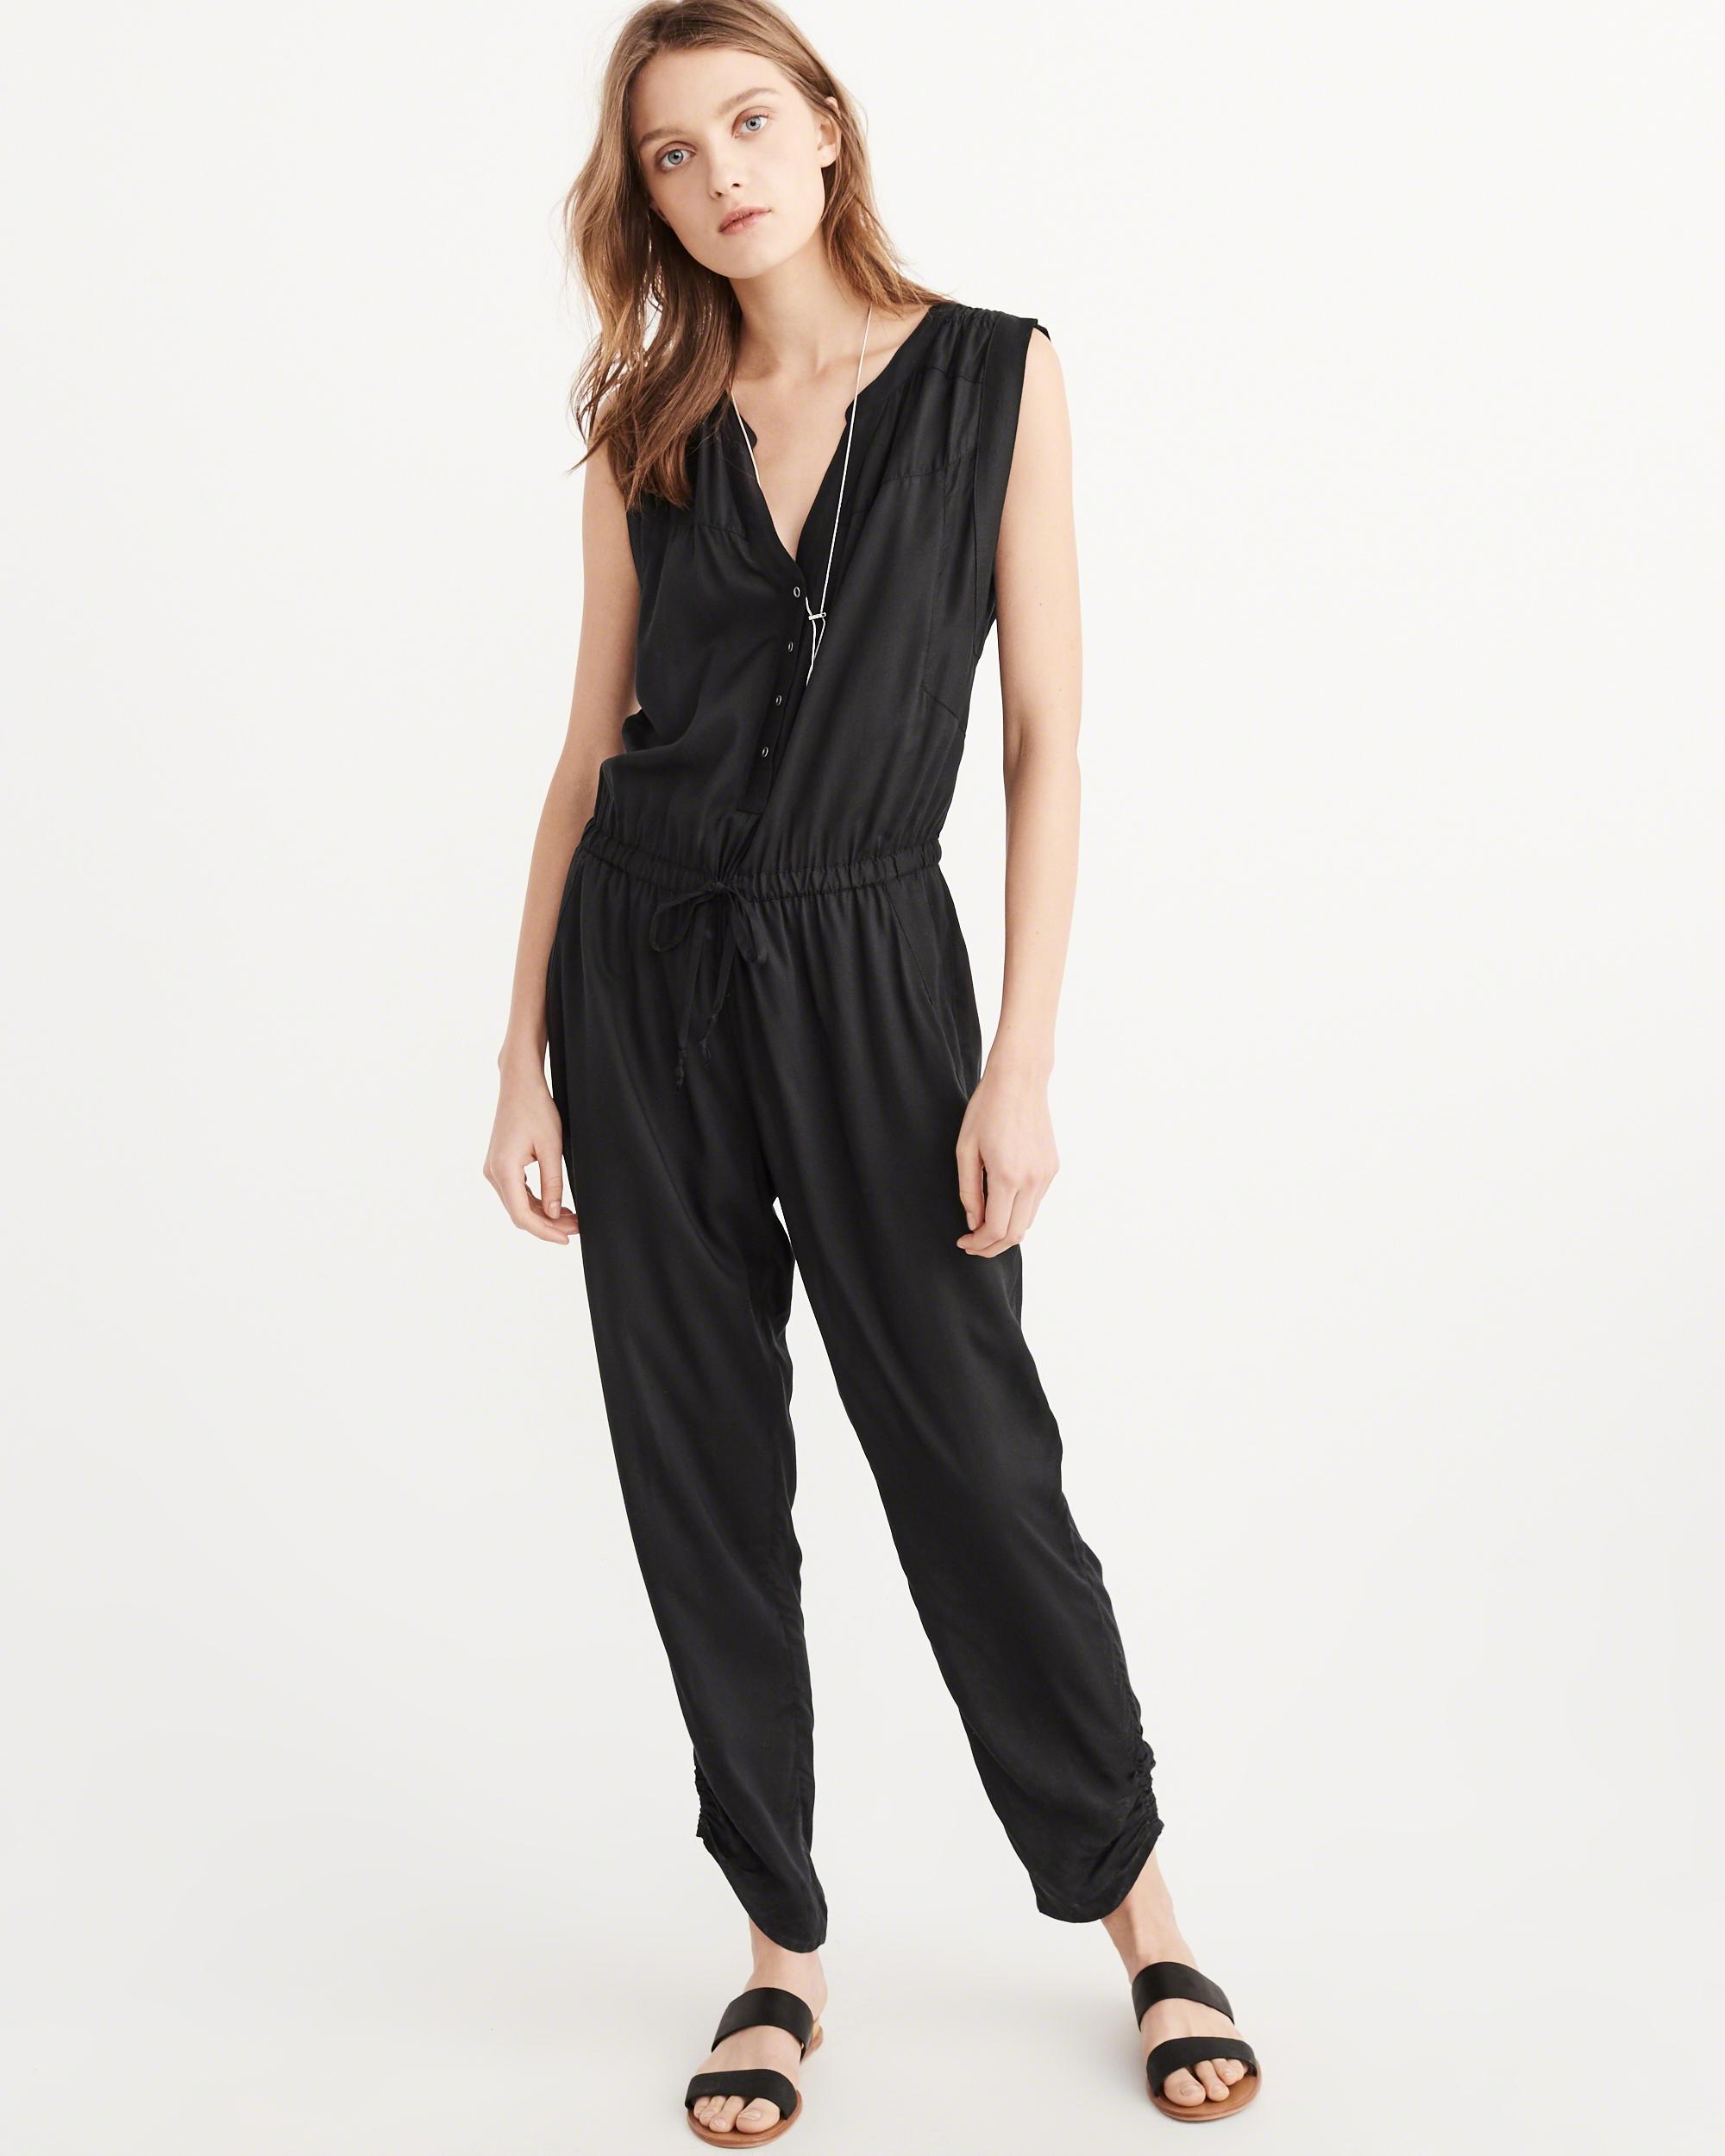 Lyst - Abercrombie & Fitch Classic Jumpsuit in Black